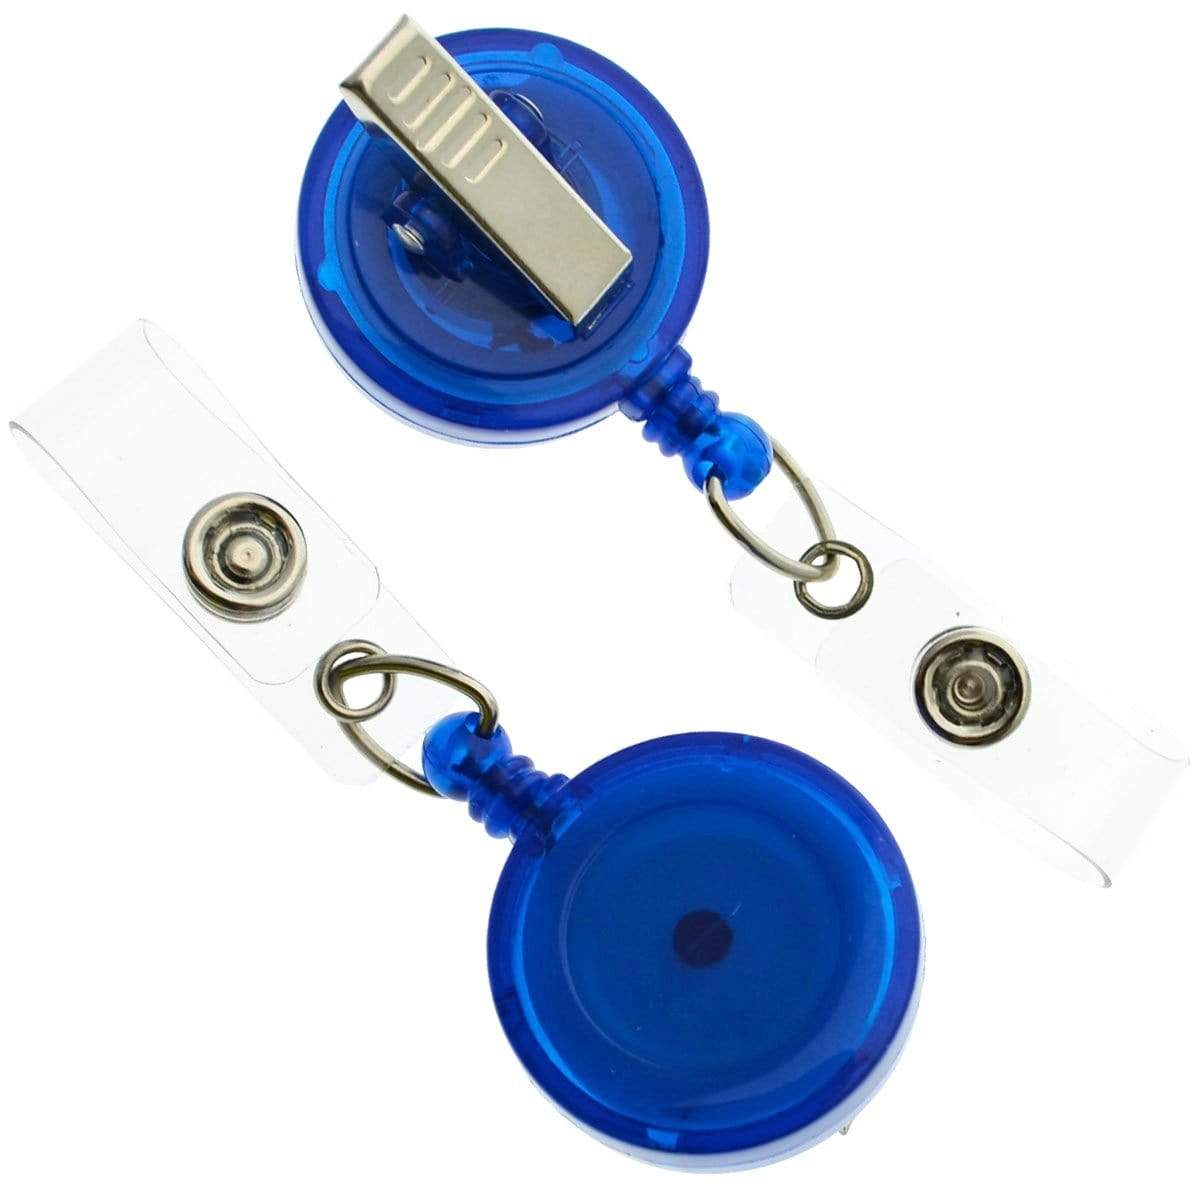  Clip-On Retractable Badge Holder - Translucent 7573-T